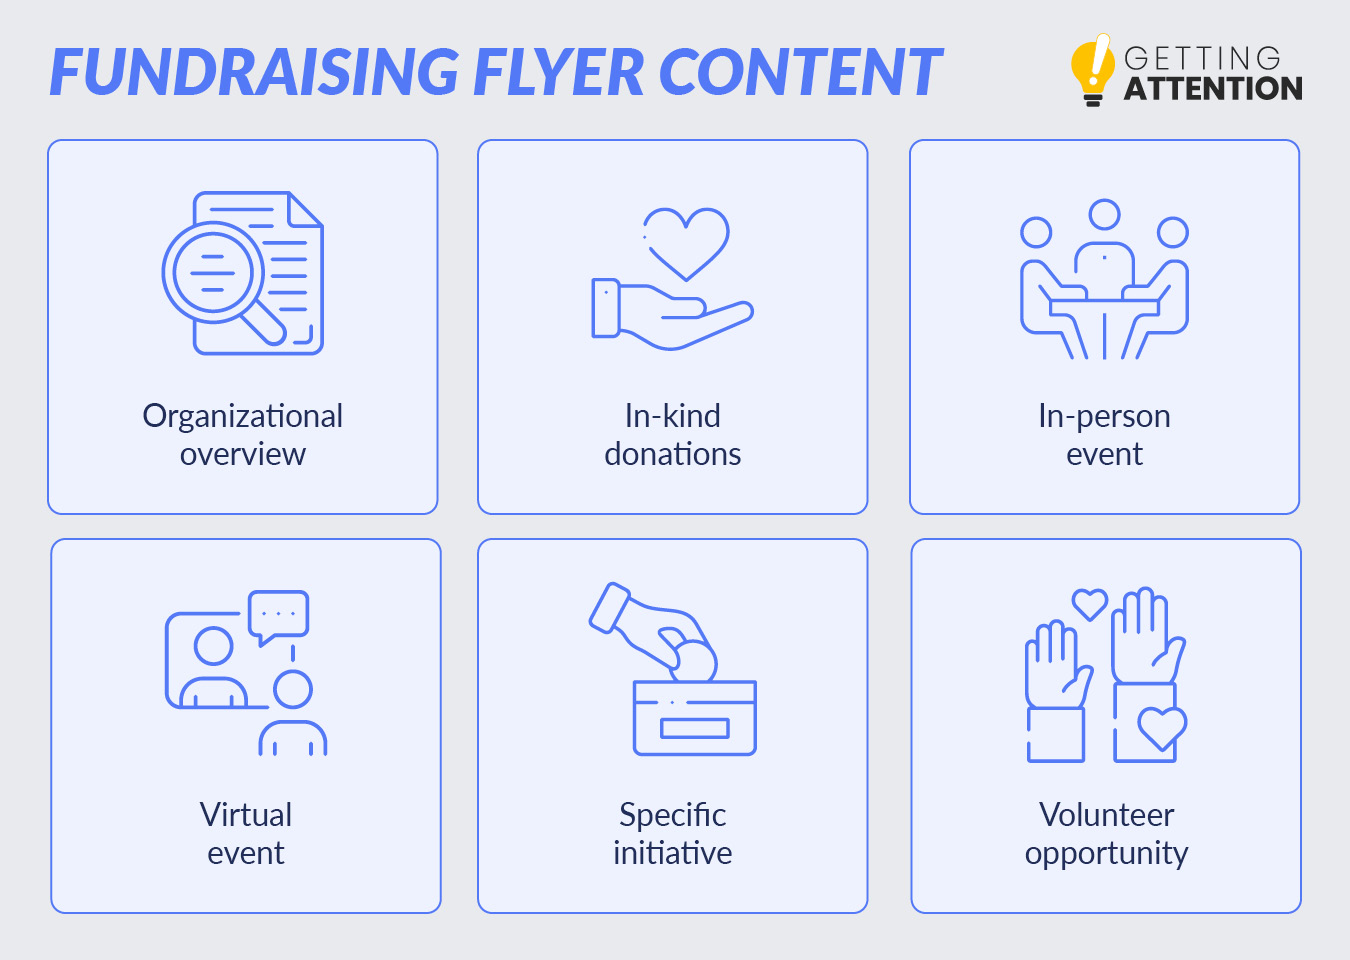 This list shows an overview of fundraising flyer content types.